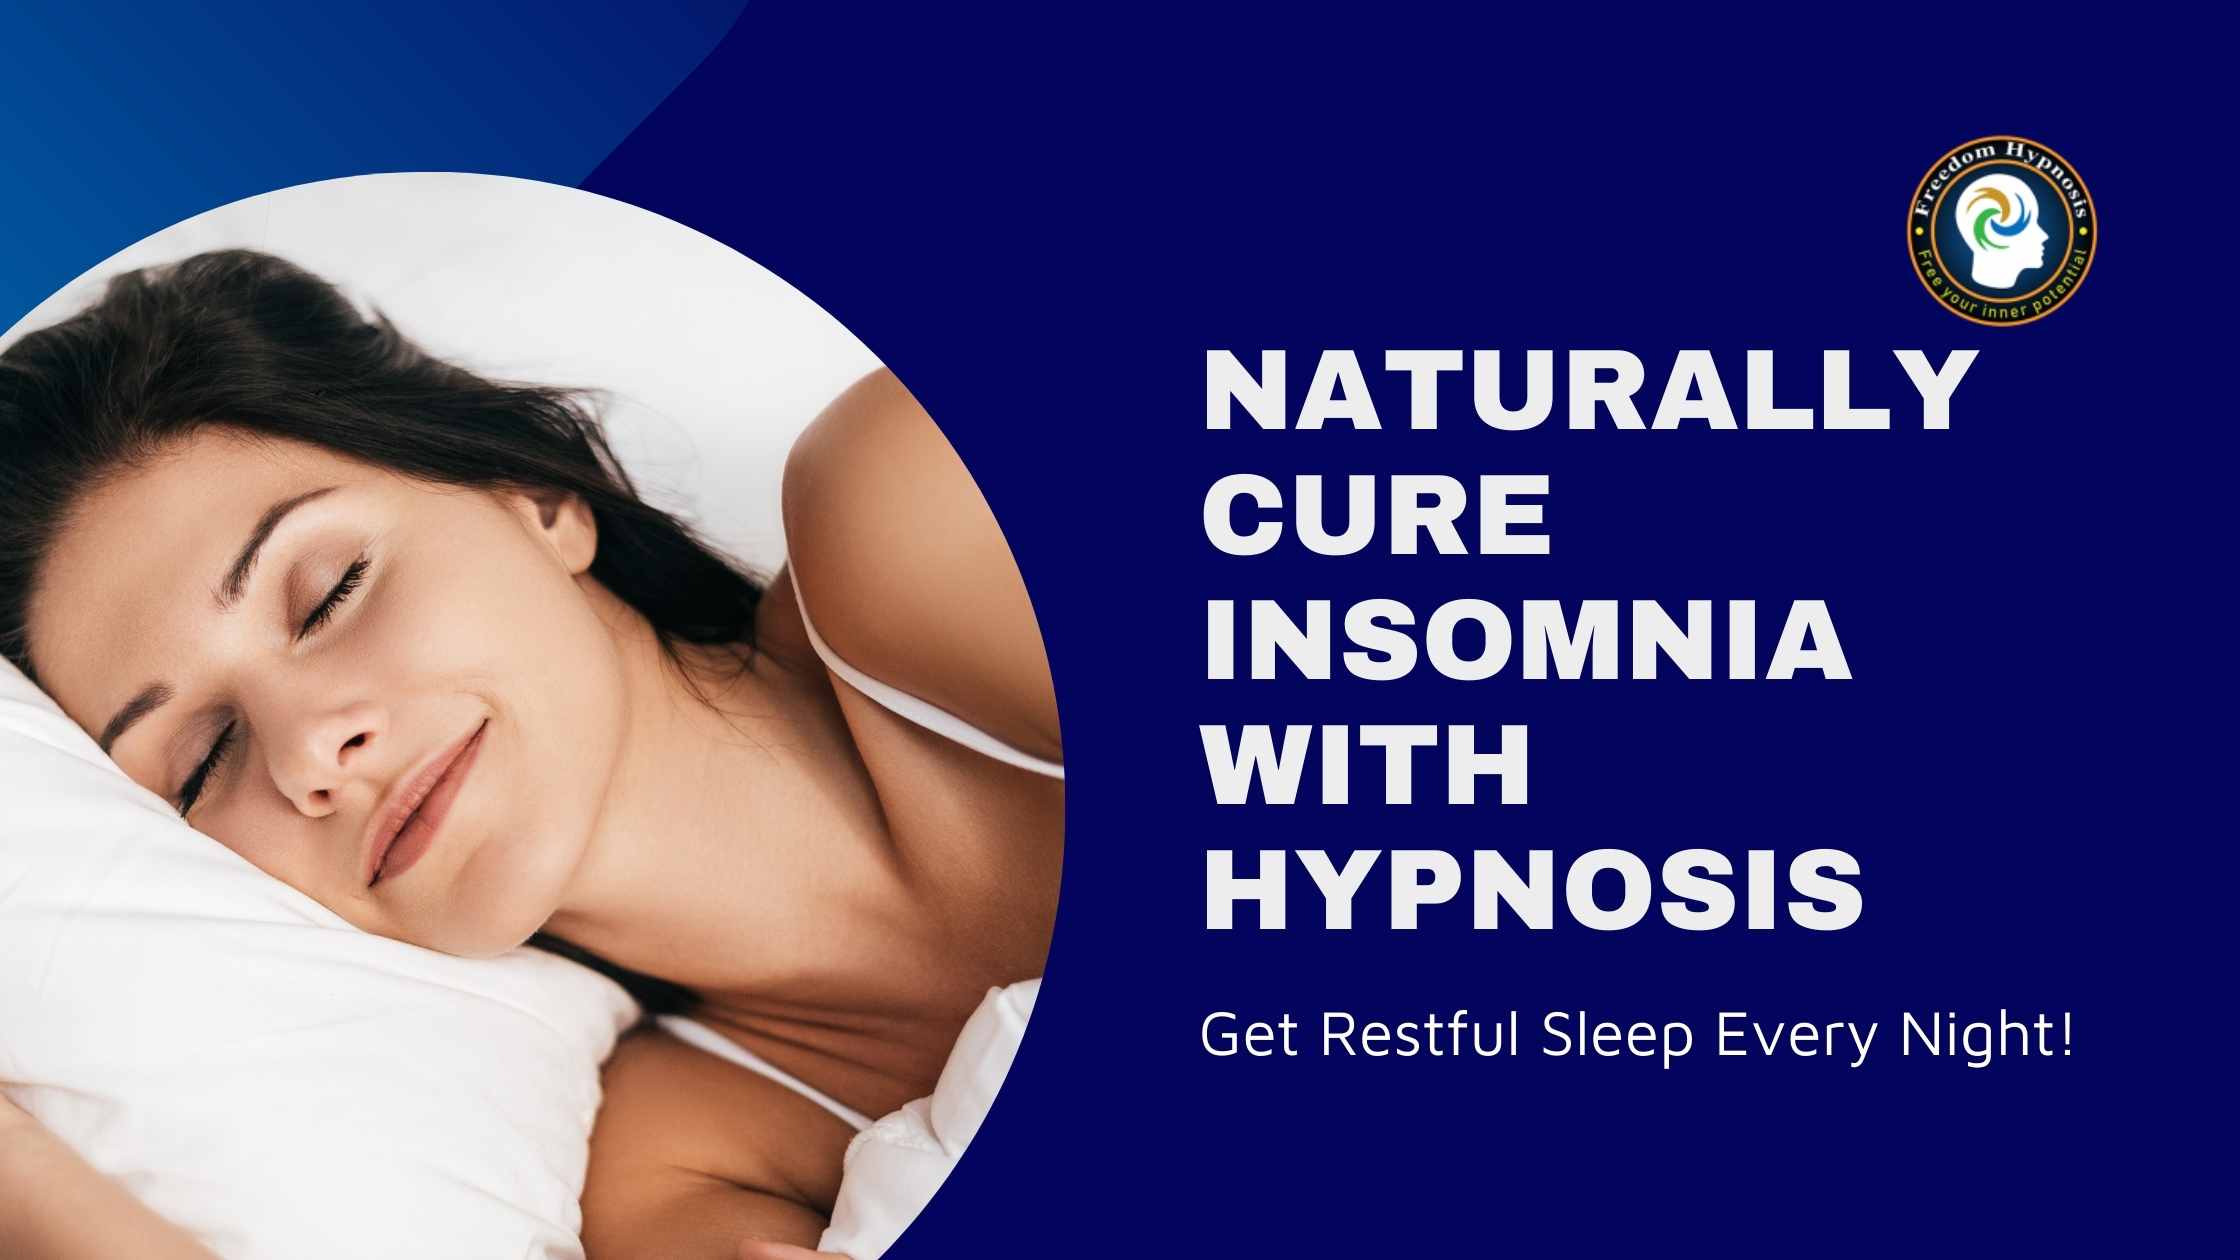 woman sleeping peacefully natural cure to insomnia - hypnosis nyc